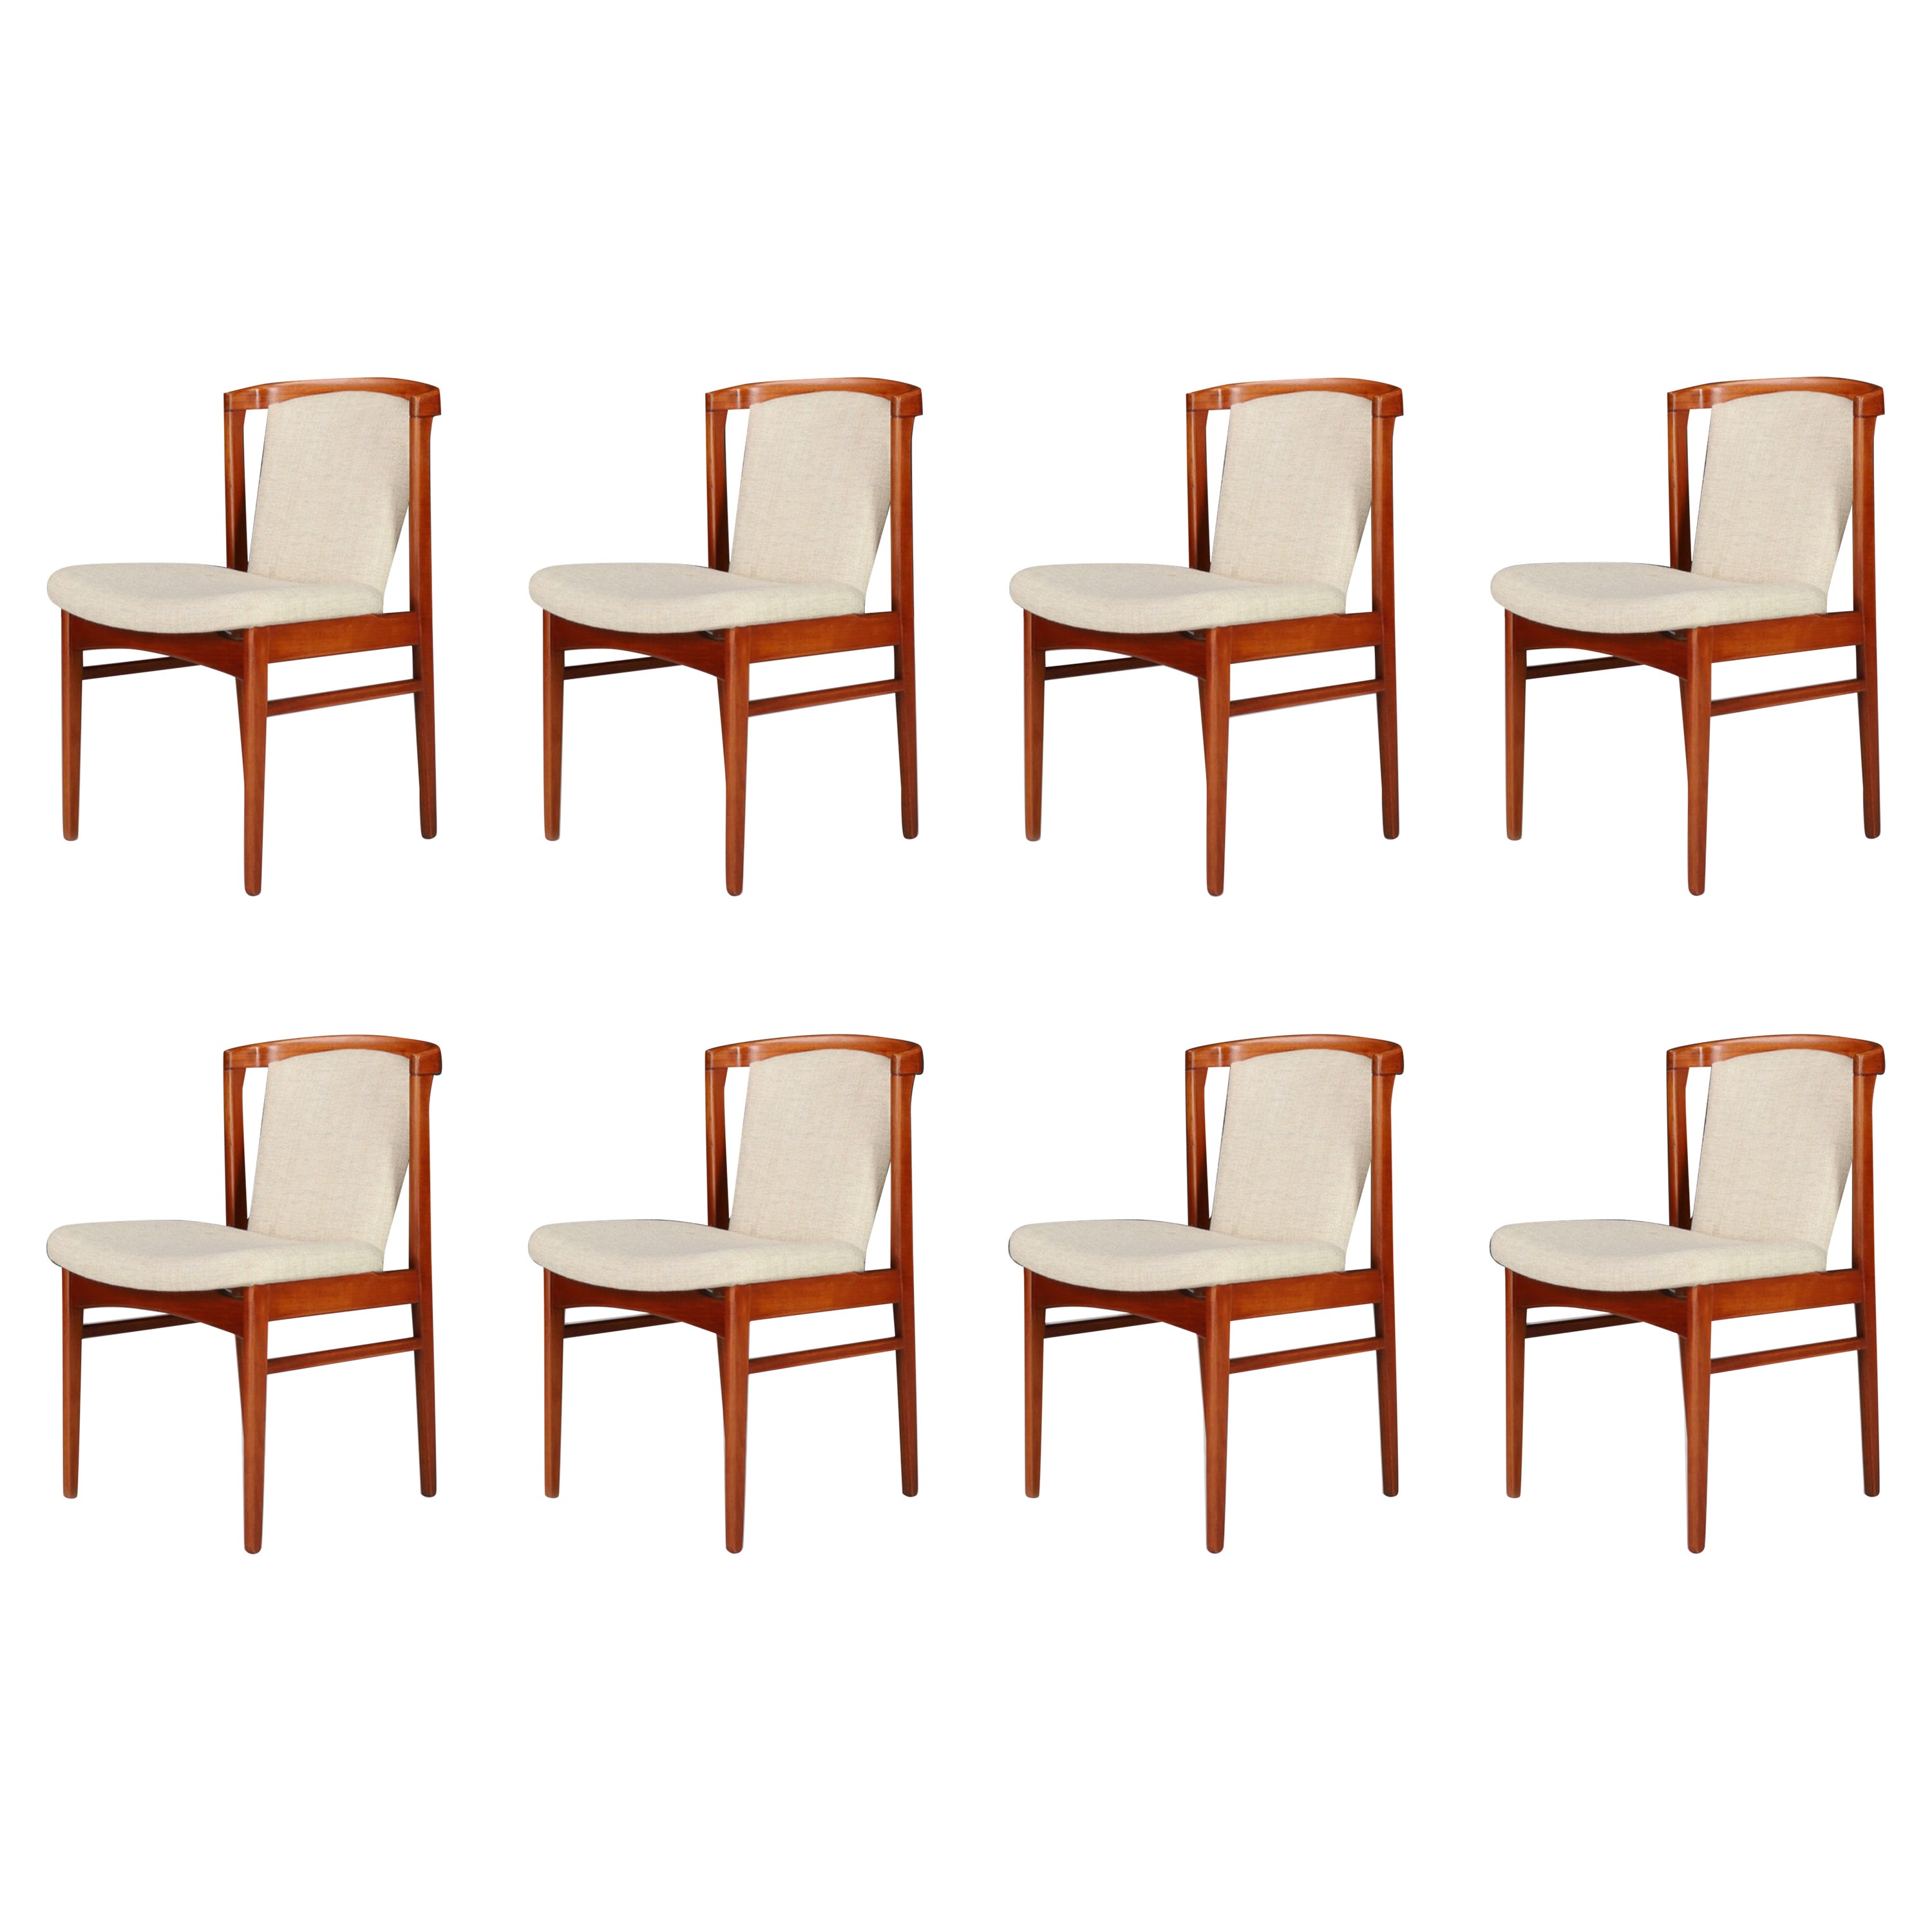 Erik Buch Dining Chairs for Orum Mobler, Denmark, 1960s For Sale